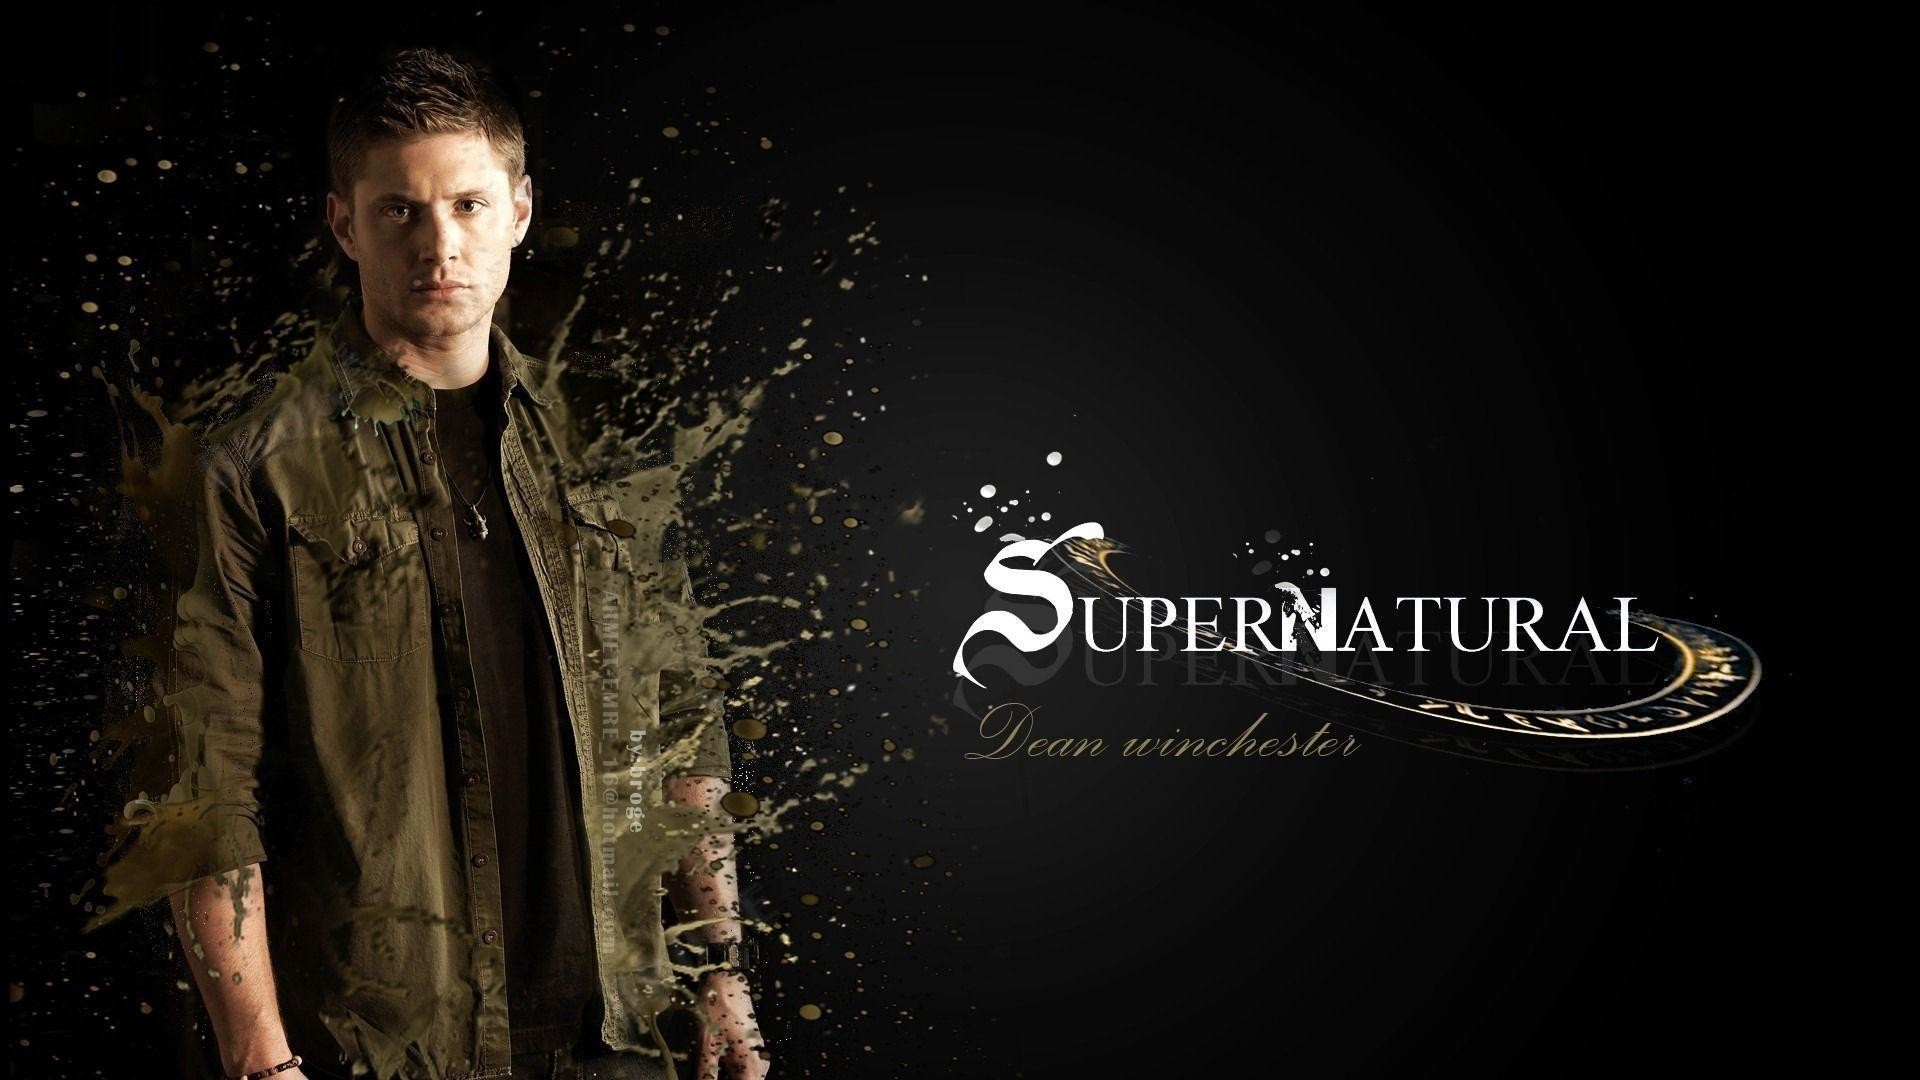 Supernatural images Dean Winchester wallpaper and background